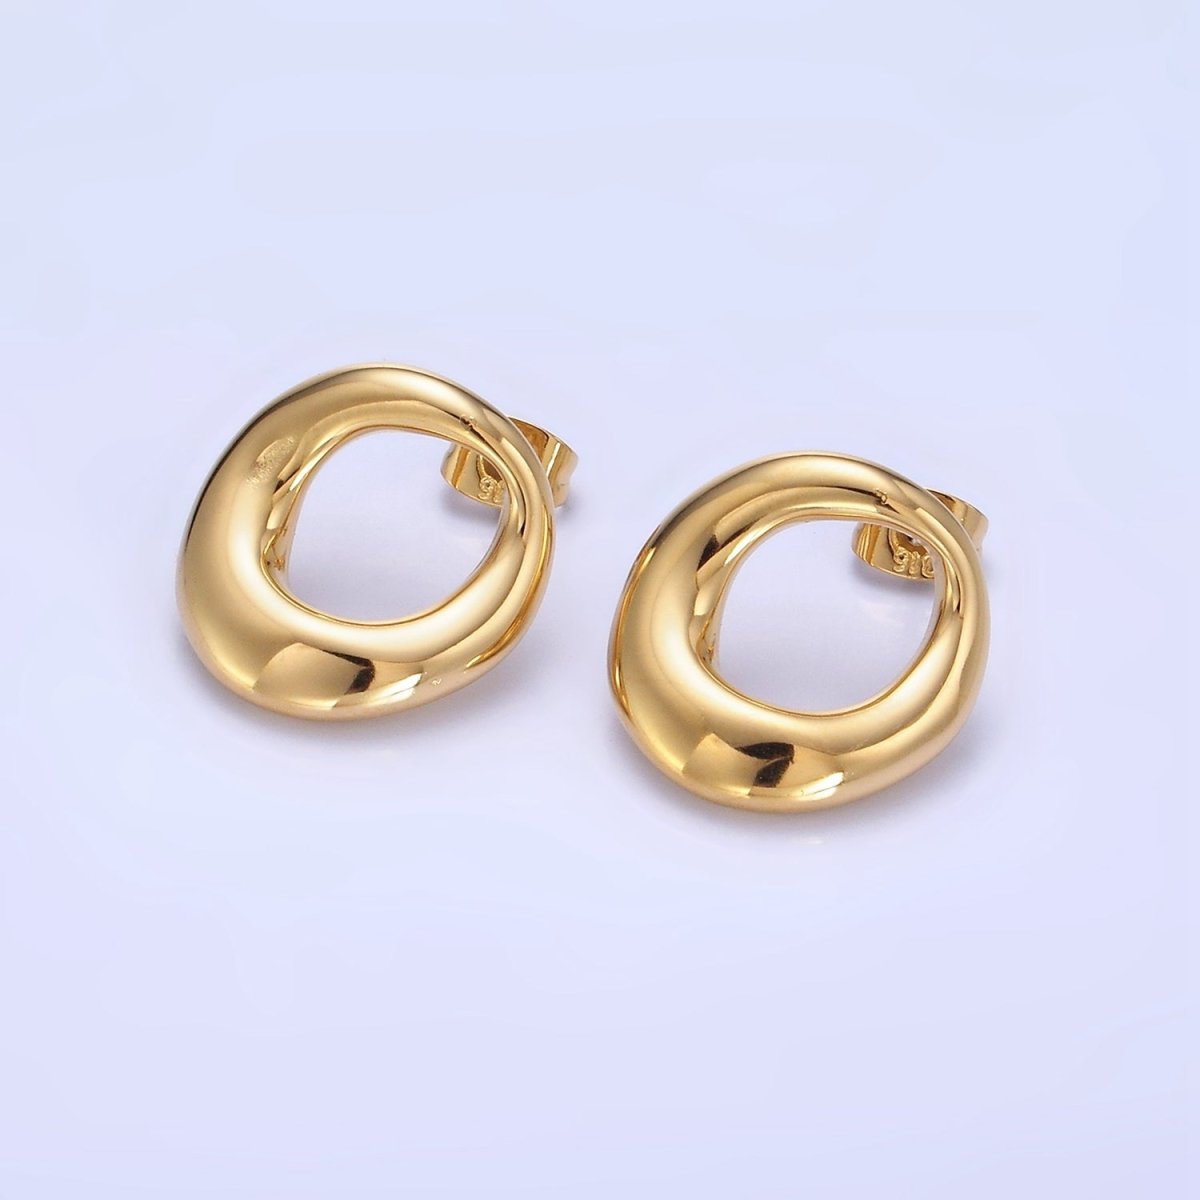 Stainless Steel 18mm Open Circular Band Stud Earrings in Gold & Silver | AB1368 AB1369 - DLUXCA